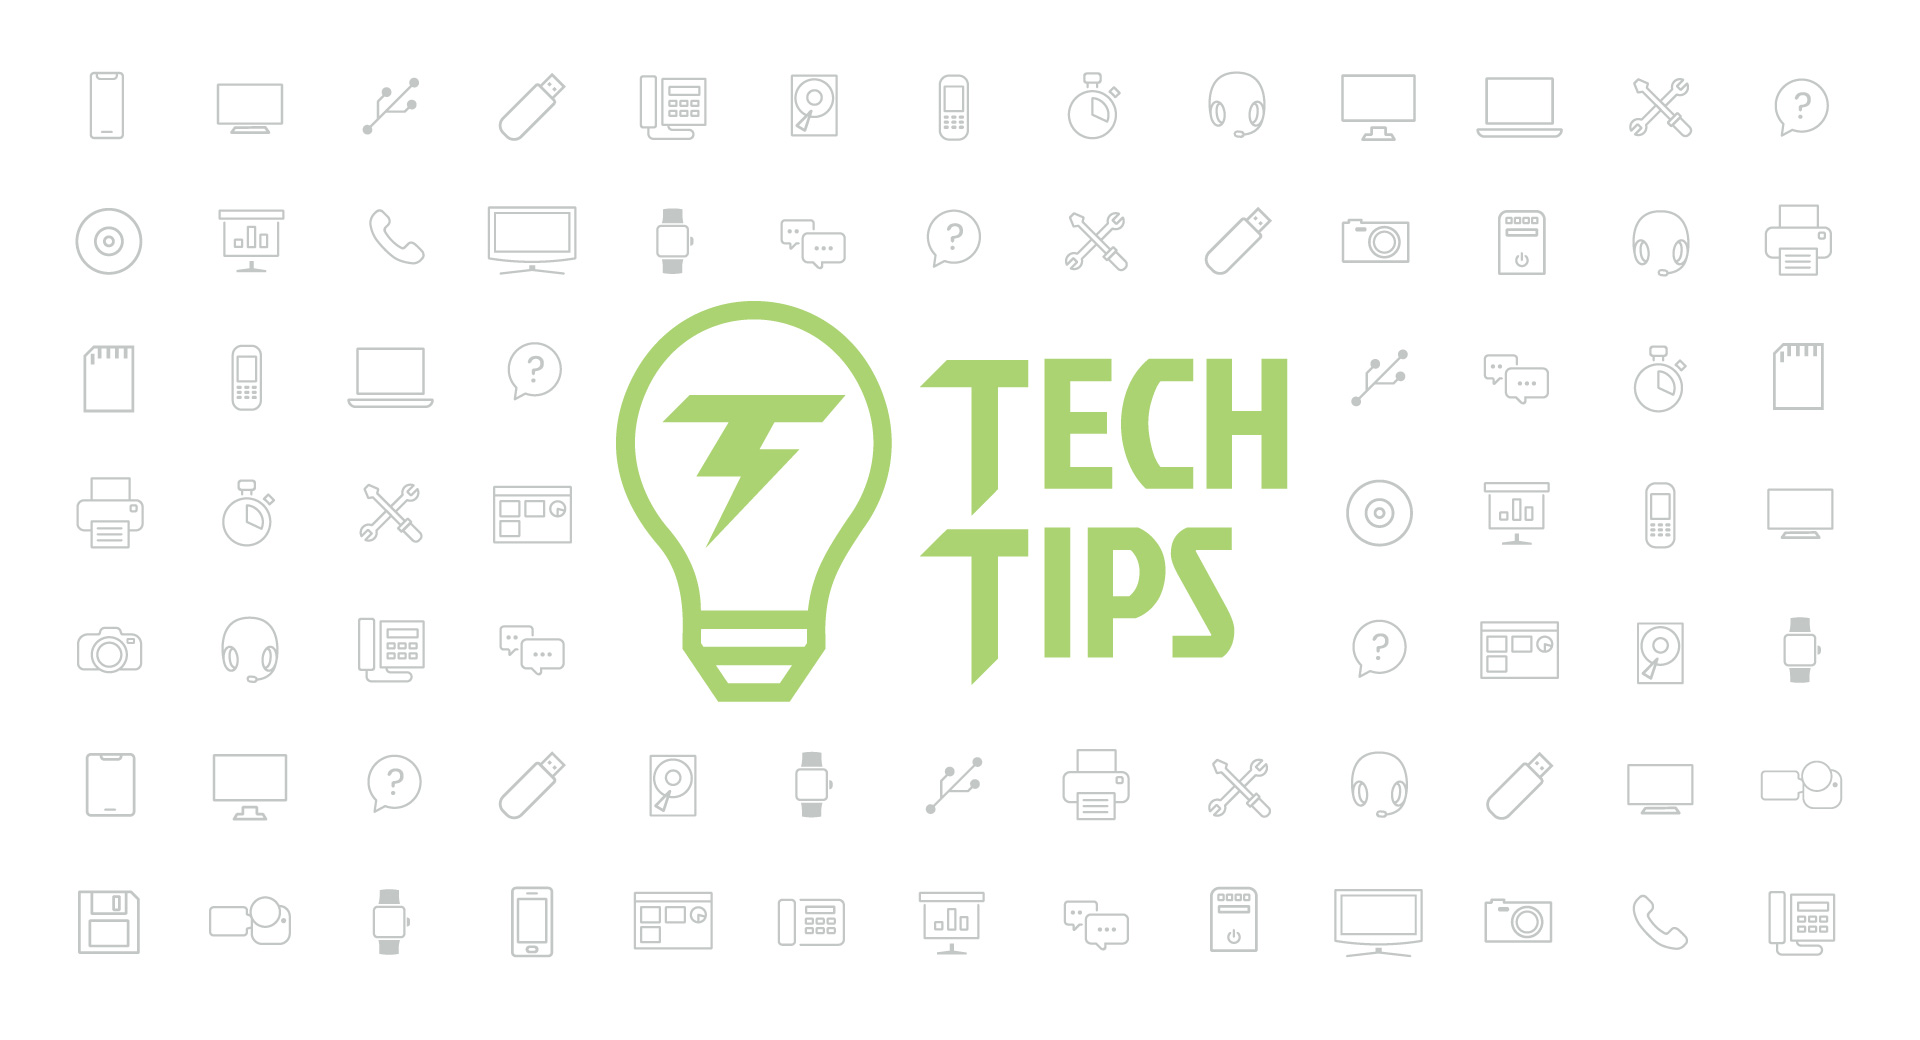 Technology Tips: February 2021 Edition